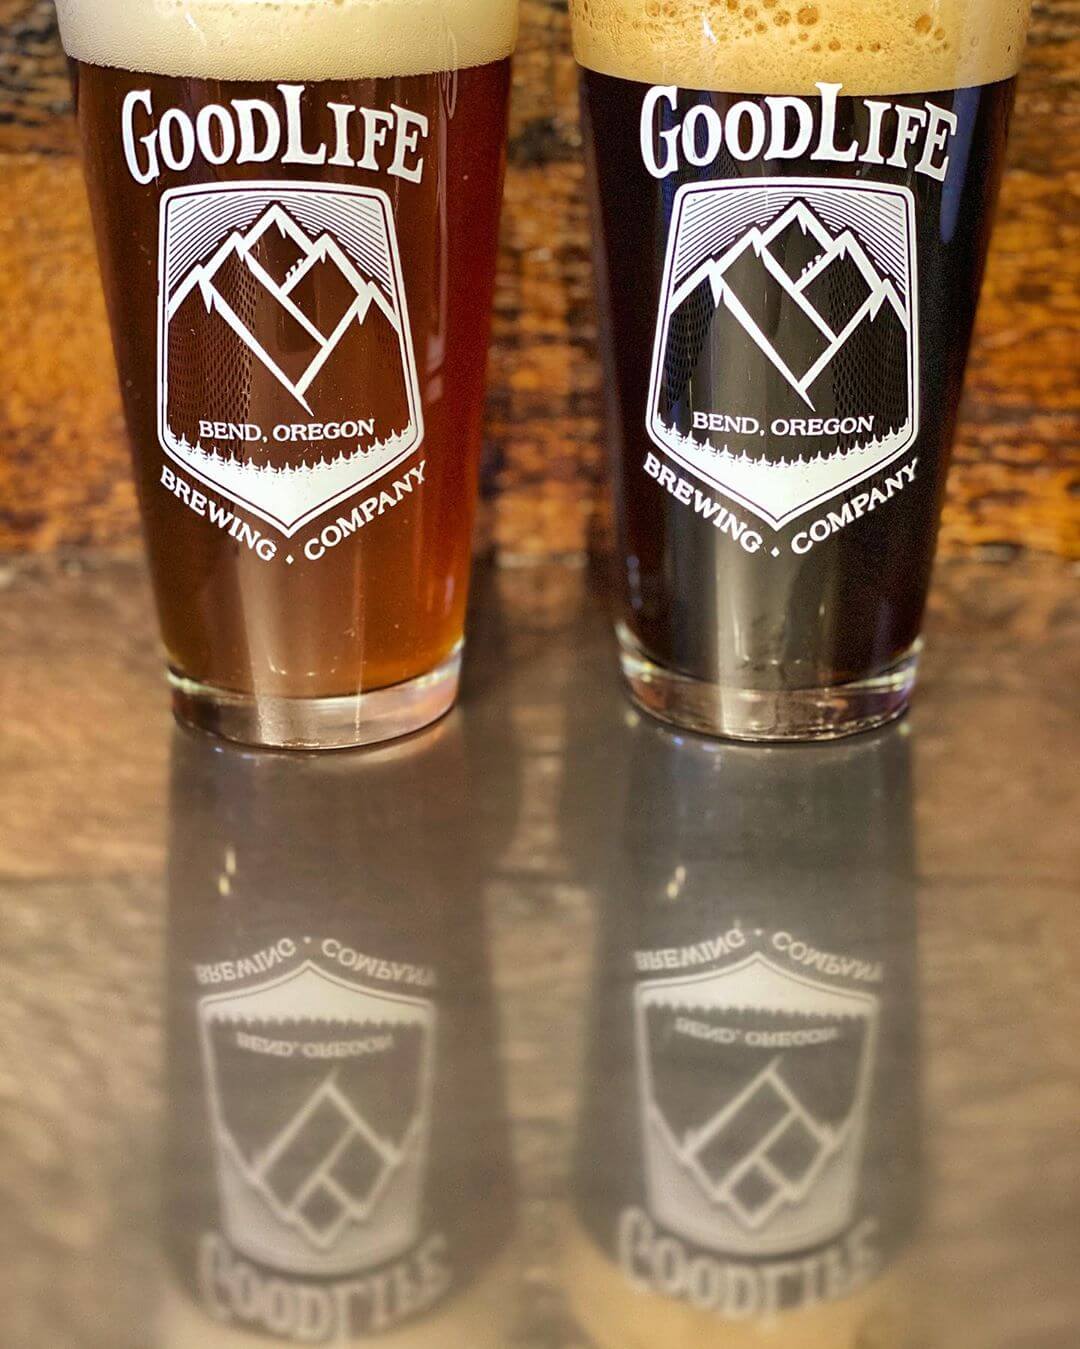 Thursday means Locals Day in the pub and today we are featuring our two local collabs we’ve recently brewed! On the left, we brewed BossLife Juicy Red IPA with @bossramblerbeerclub and on the right is Autobahn German Porter that we brewed with @deschutesbrewery. One beer is with Oregon’s Best New Brewery and the other is with one of Oregon’s Best Breweries! Both are limited availability so come on down to the pub and try both of these beers before they’re gone! #goodlifebrewing